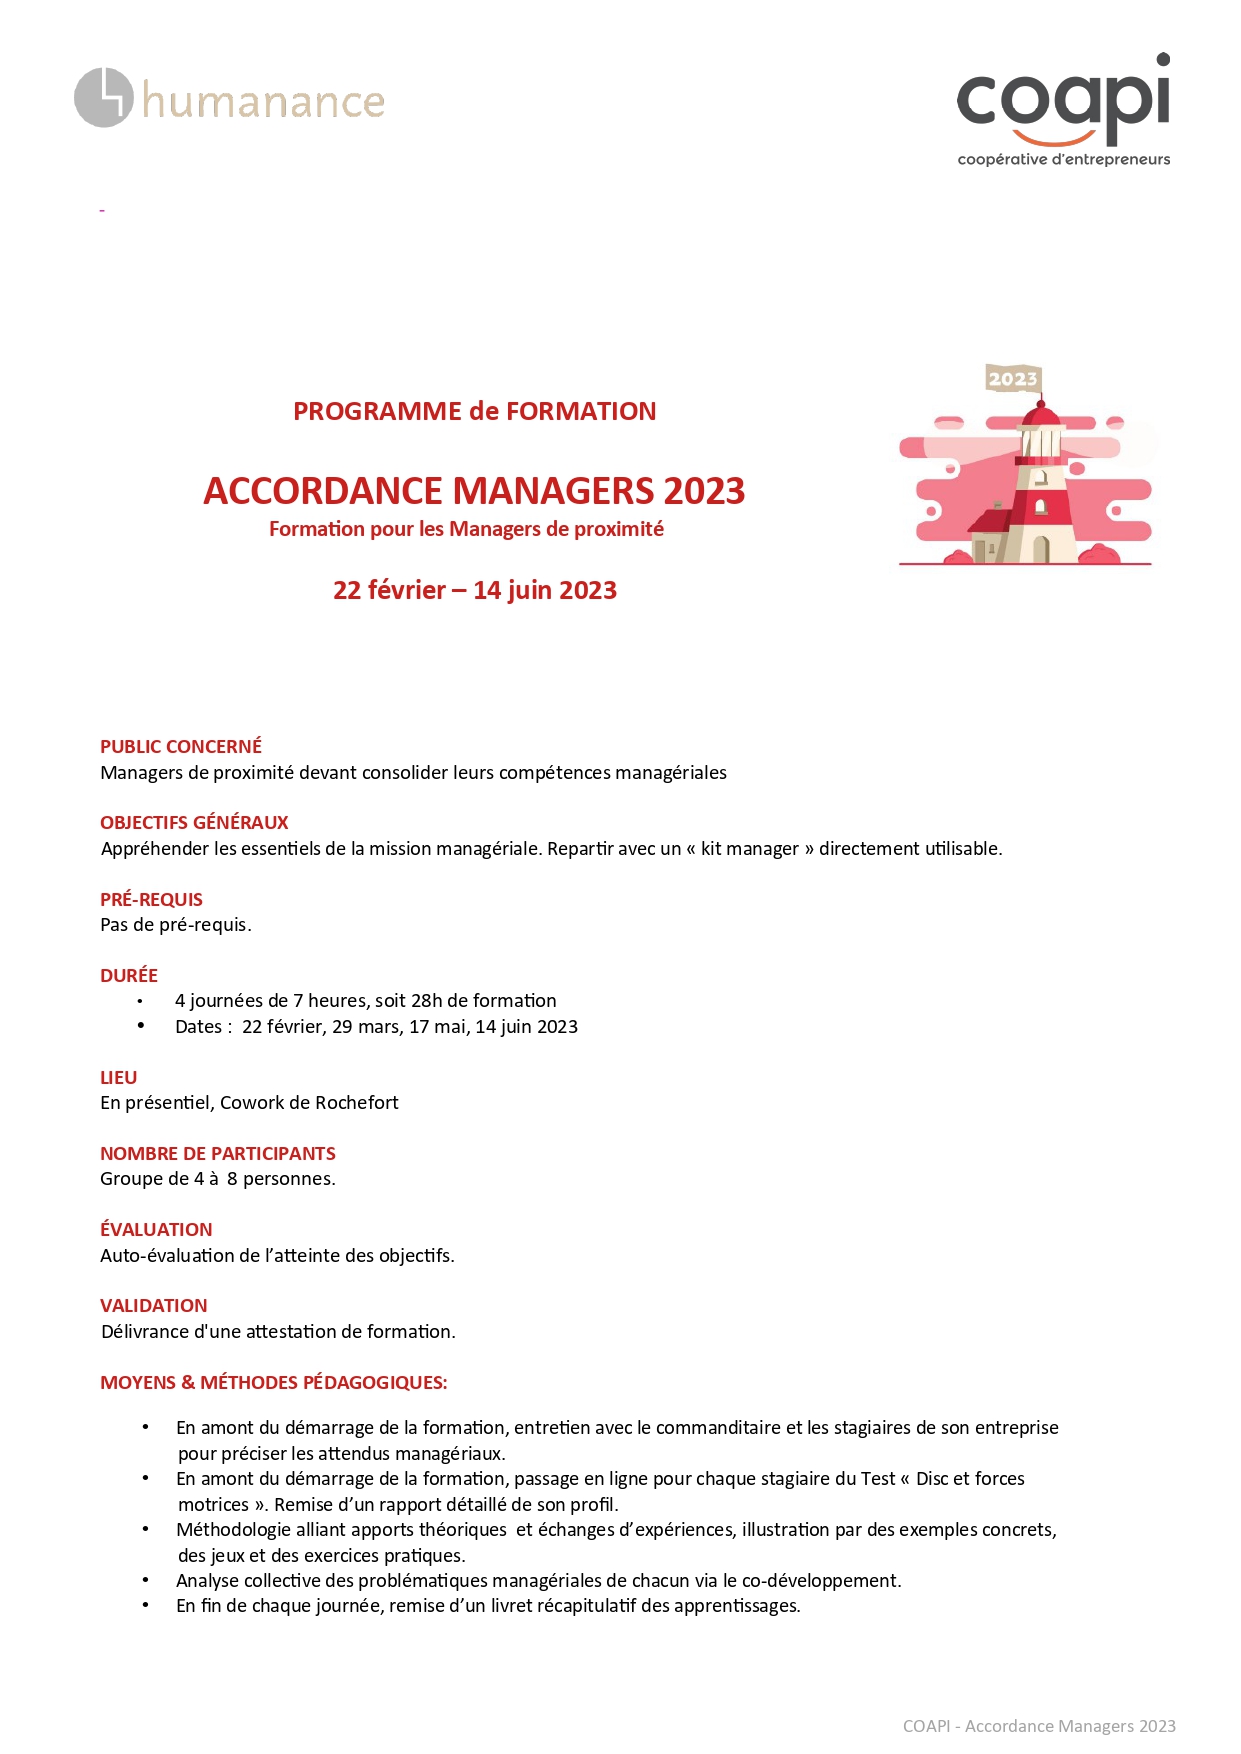 Accordance Managers 2023